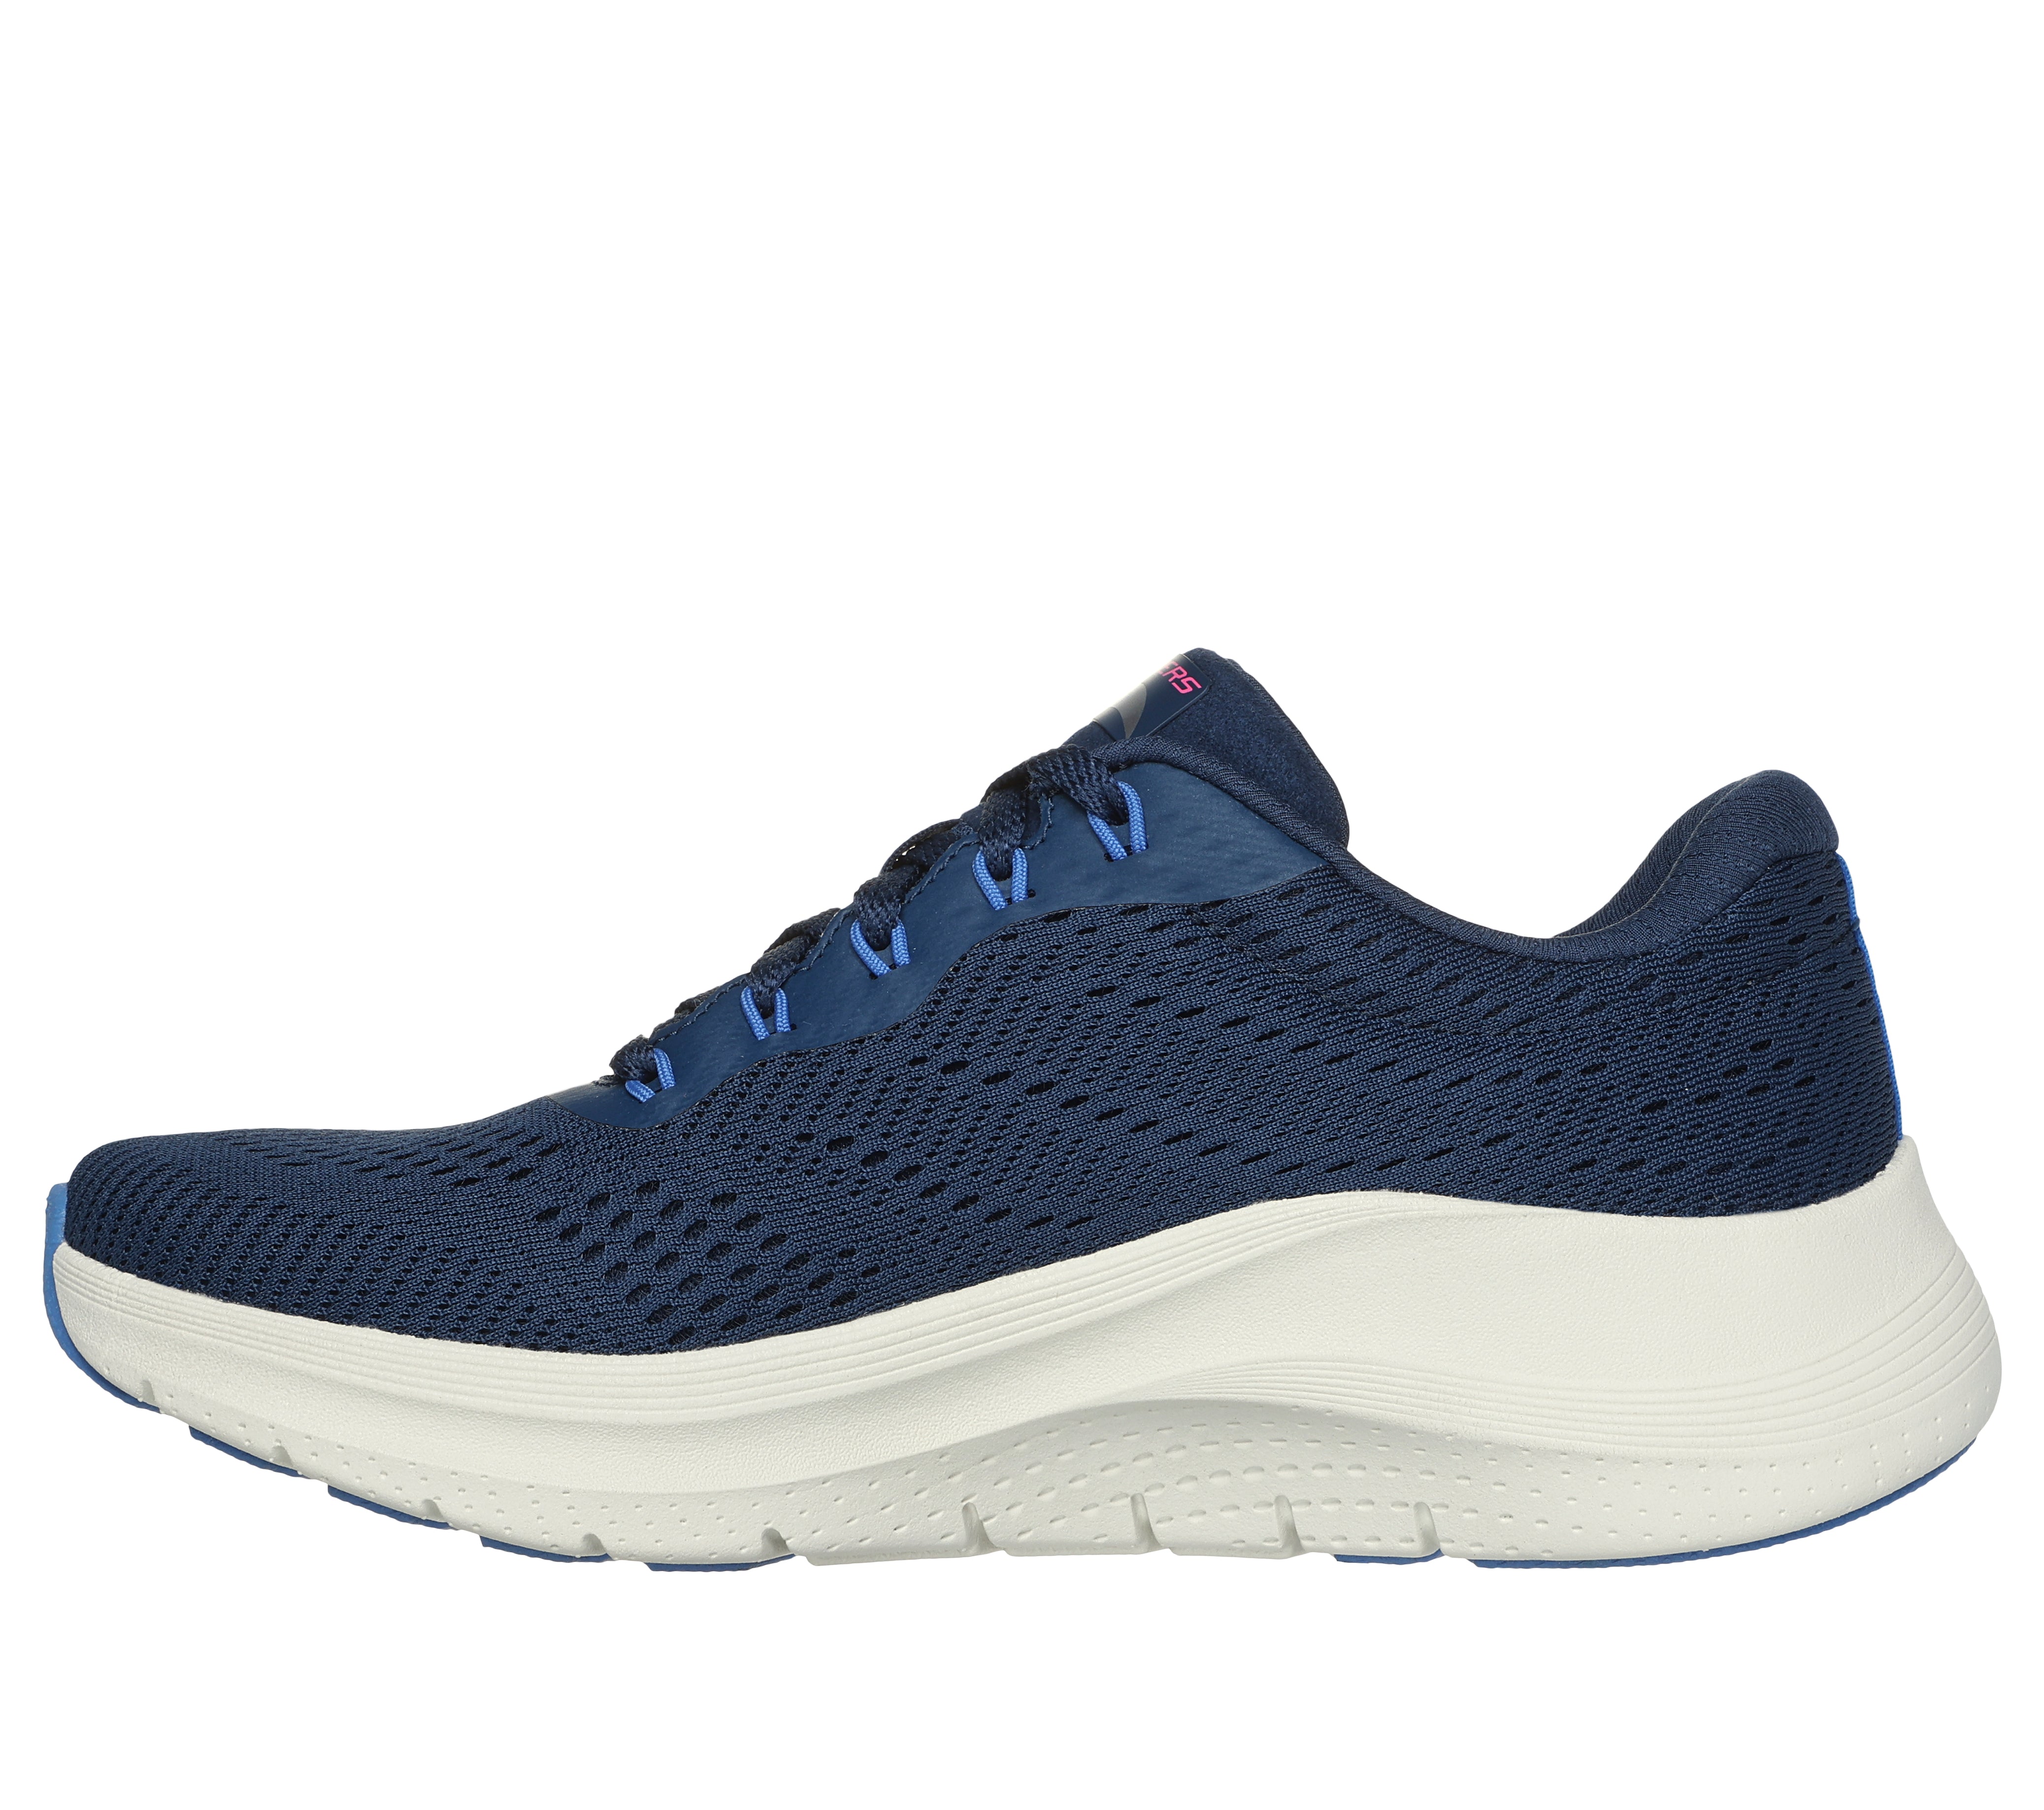 Skechers 150051 Arch Fit 2.0 - Big League Ladies Navy Multi Textile Vegan Arch Support Lace Up Trainers